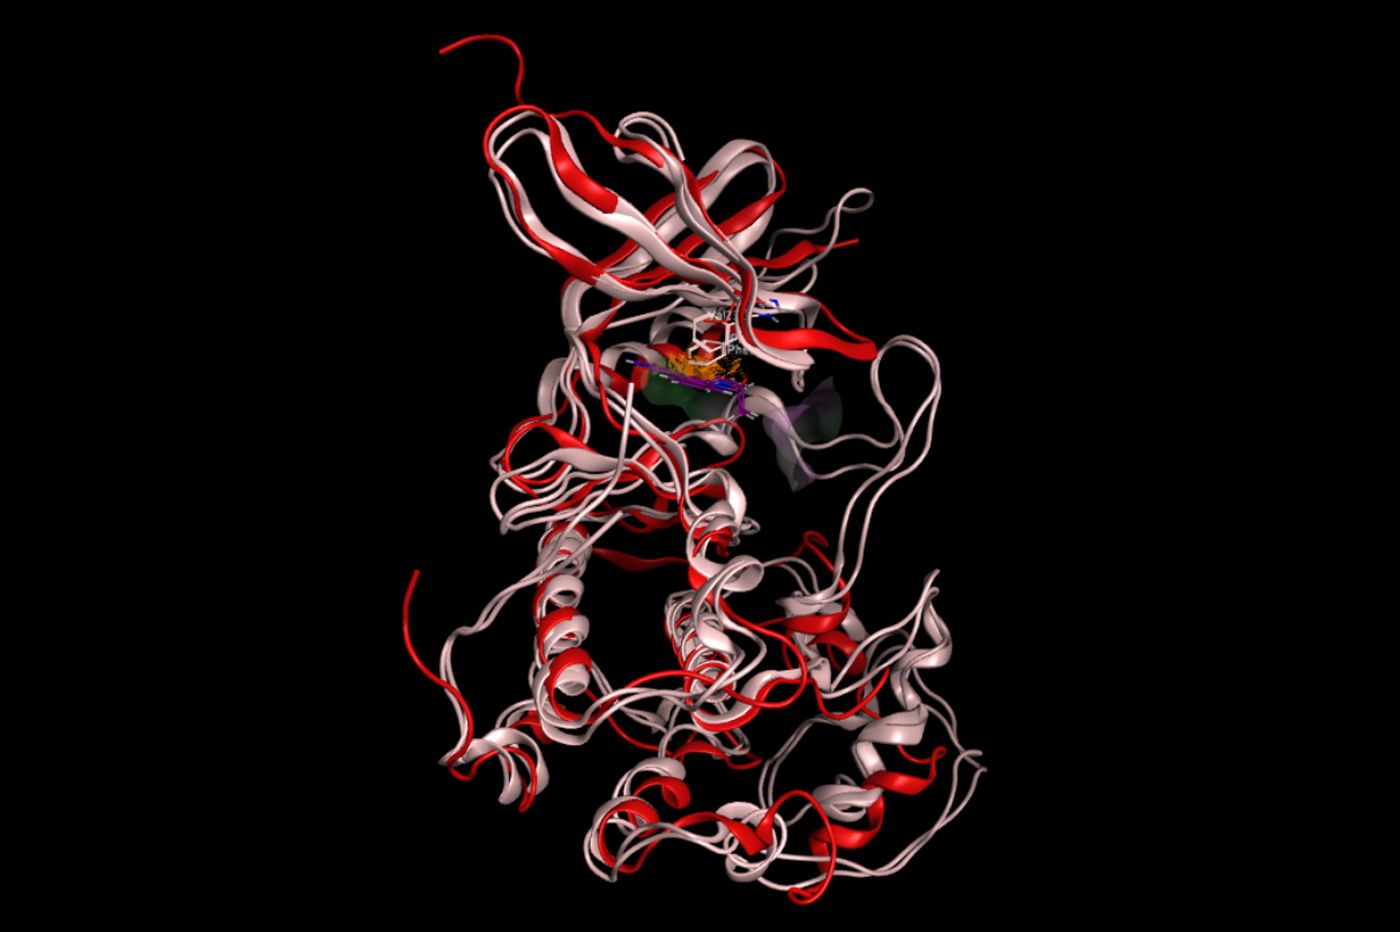 CCRK structure overlay with small molecule in kinase pocket. Professor Cheng is working closely with experts in chemistry and computer engineering to discover CCRK-targeted drugs